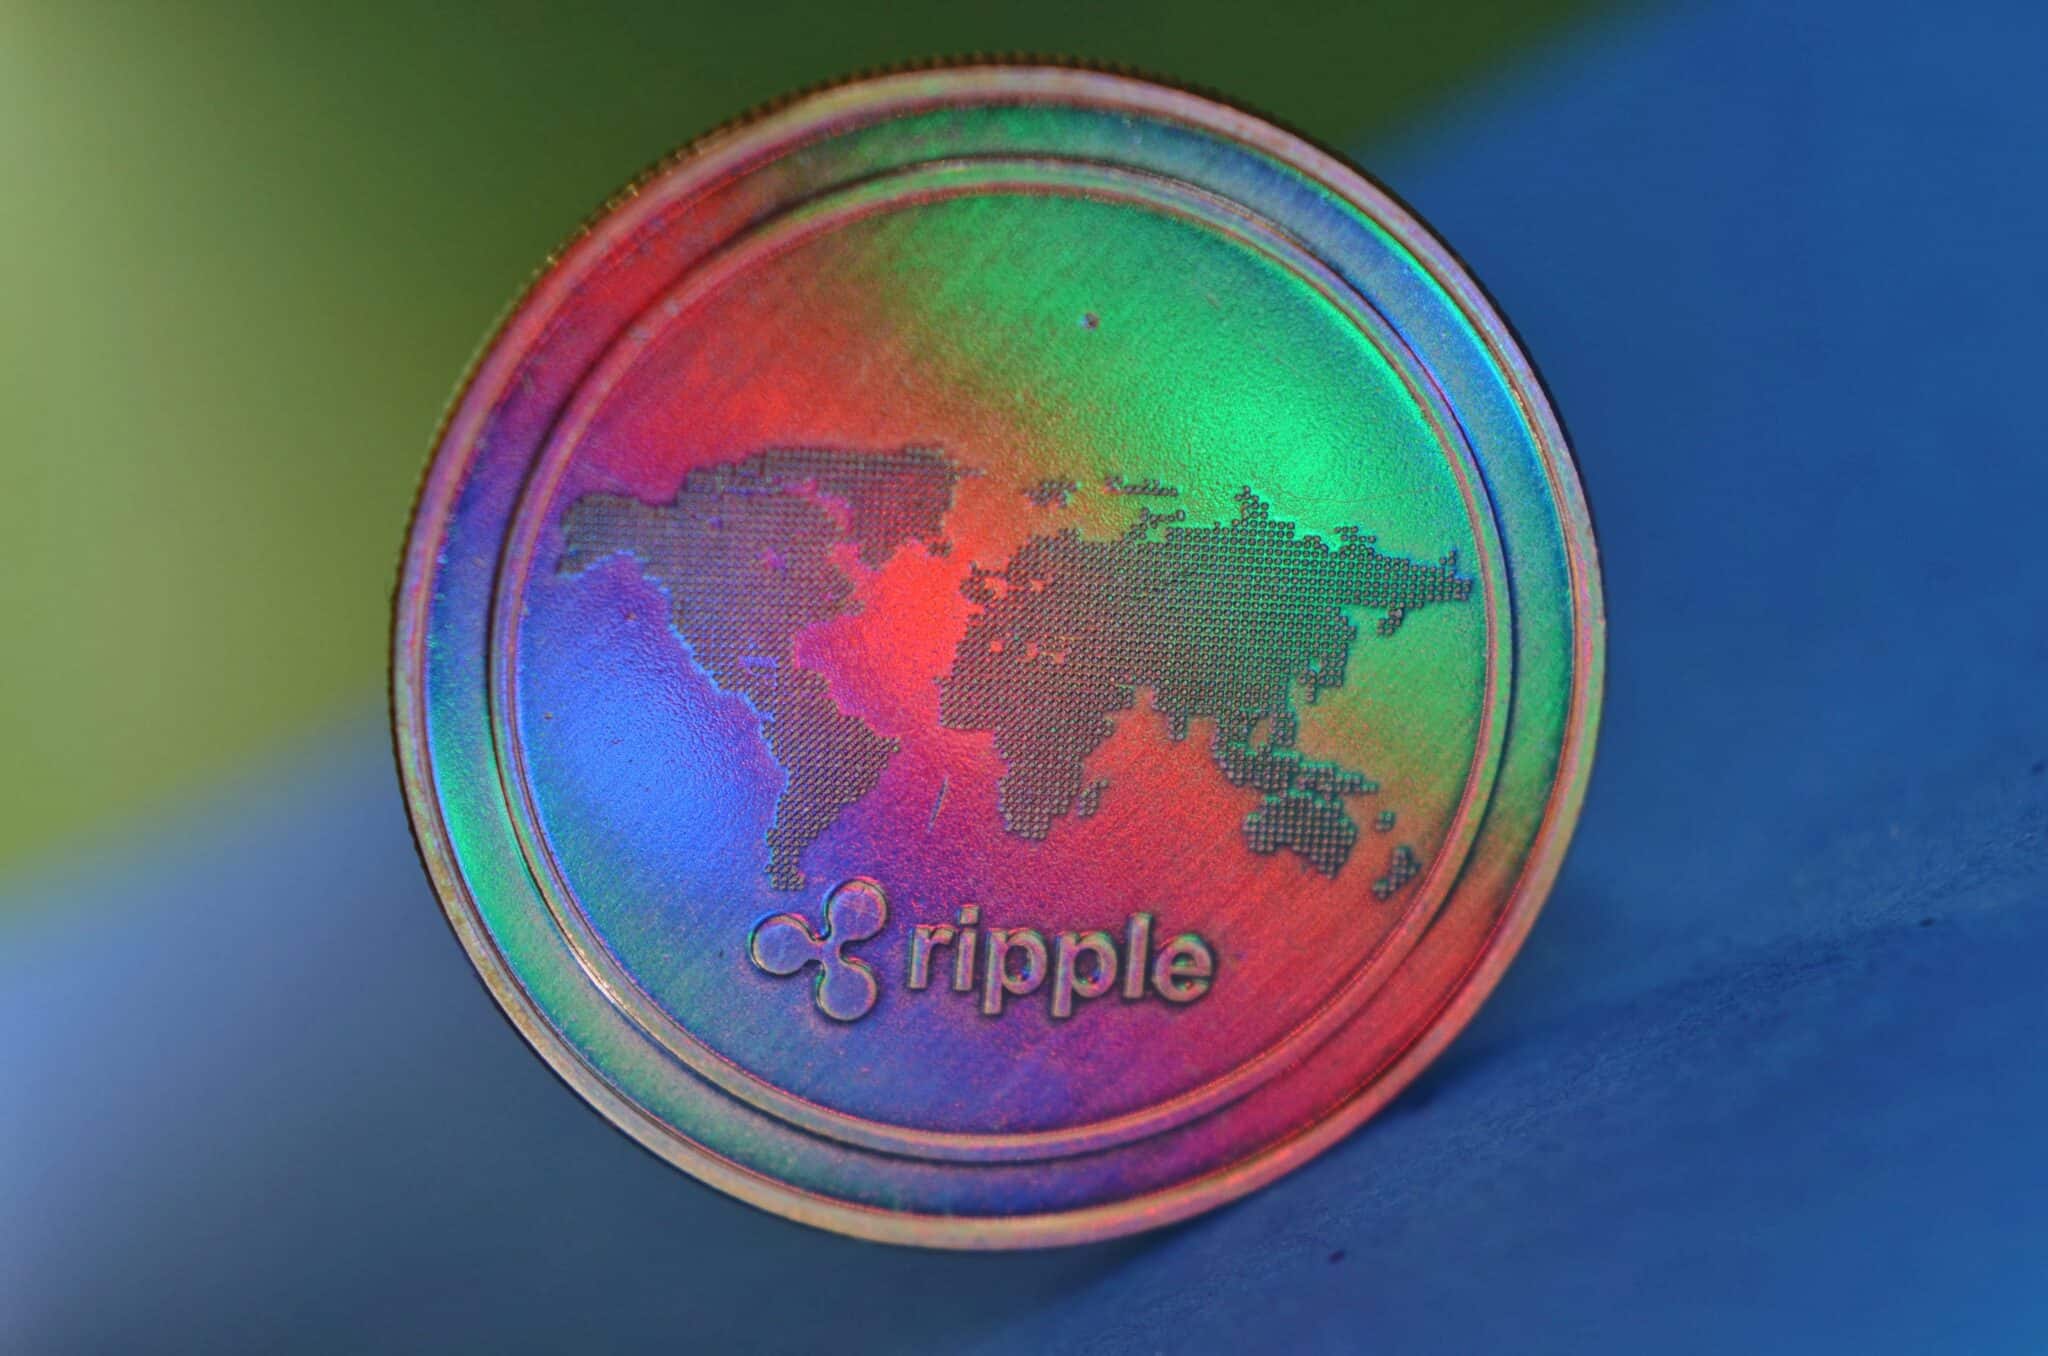 coin, cryptocurrency, ripple